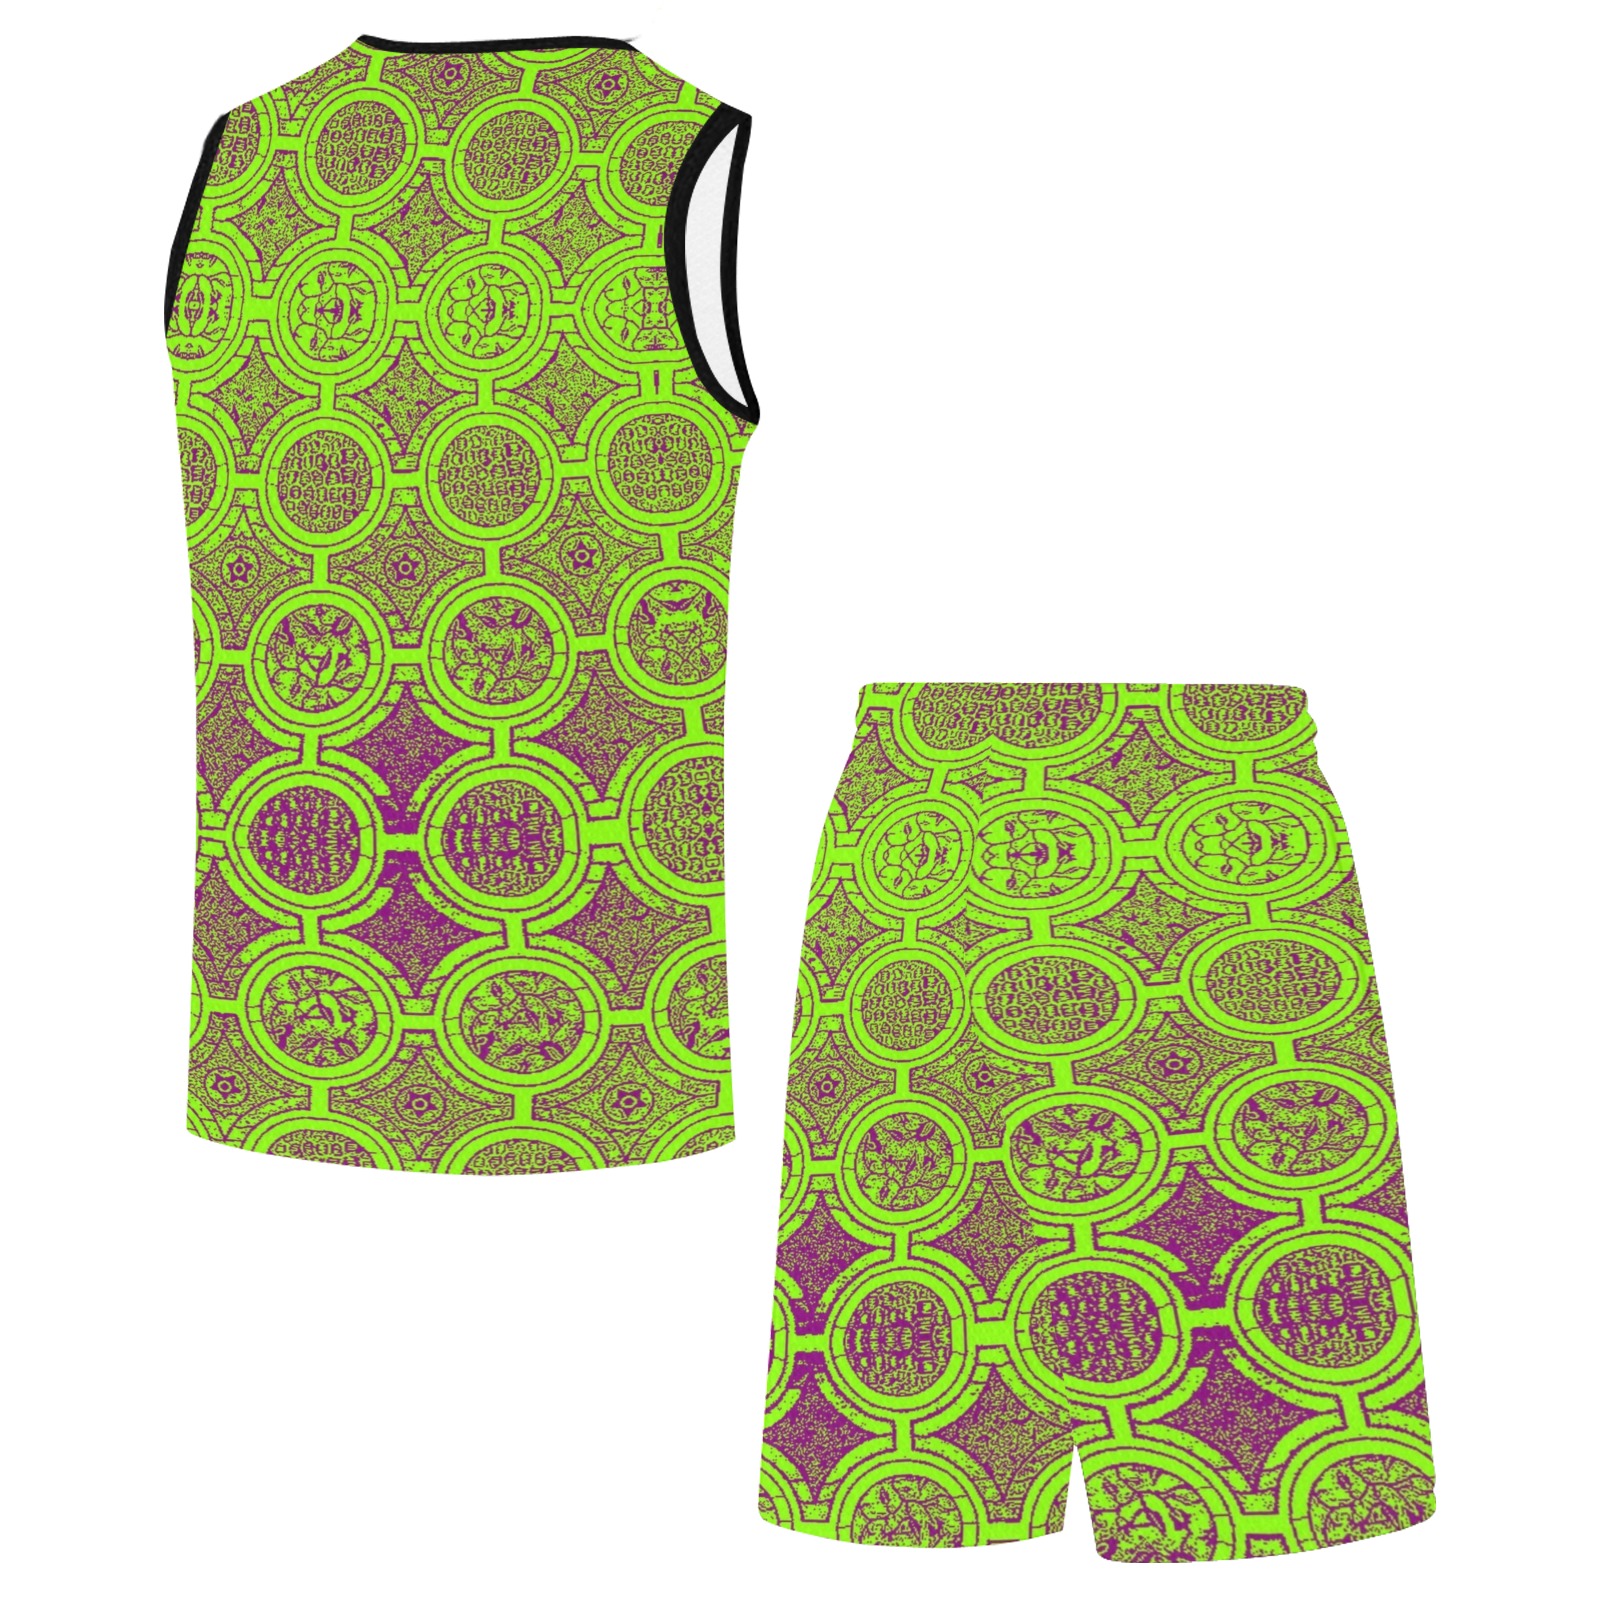 AFRICAN PRINT PATTERN 2 Basketball Uniform with Pocket